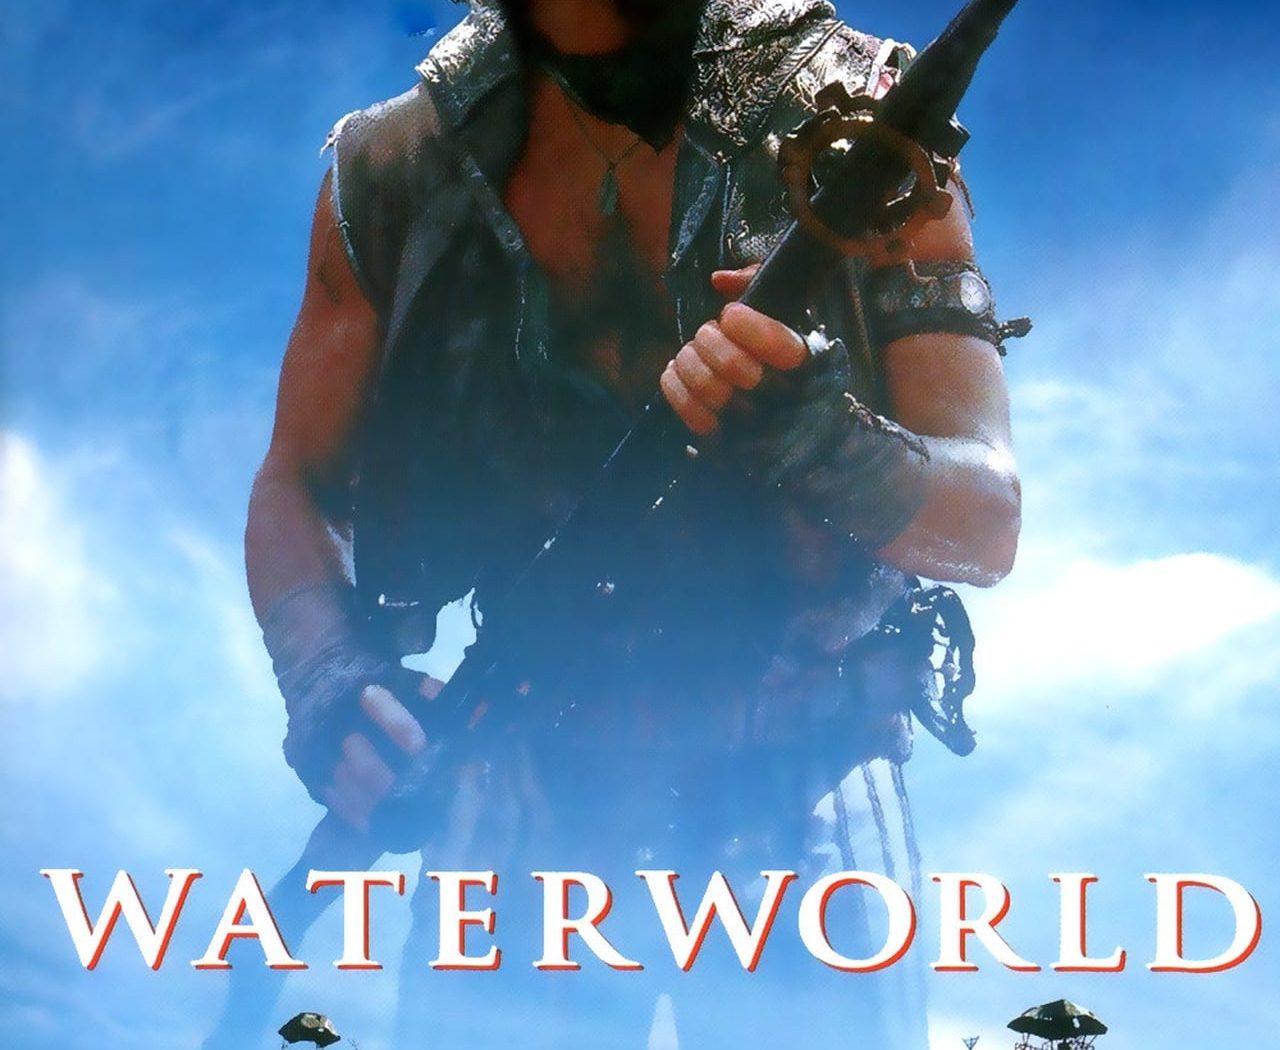 Poster for the movie "Waterworld"